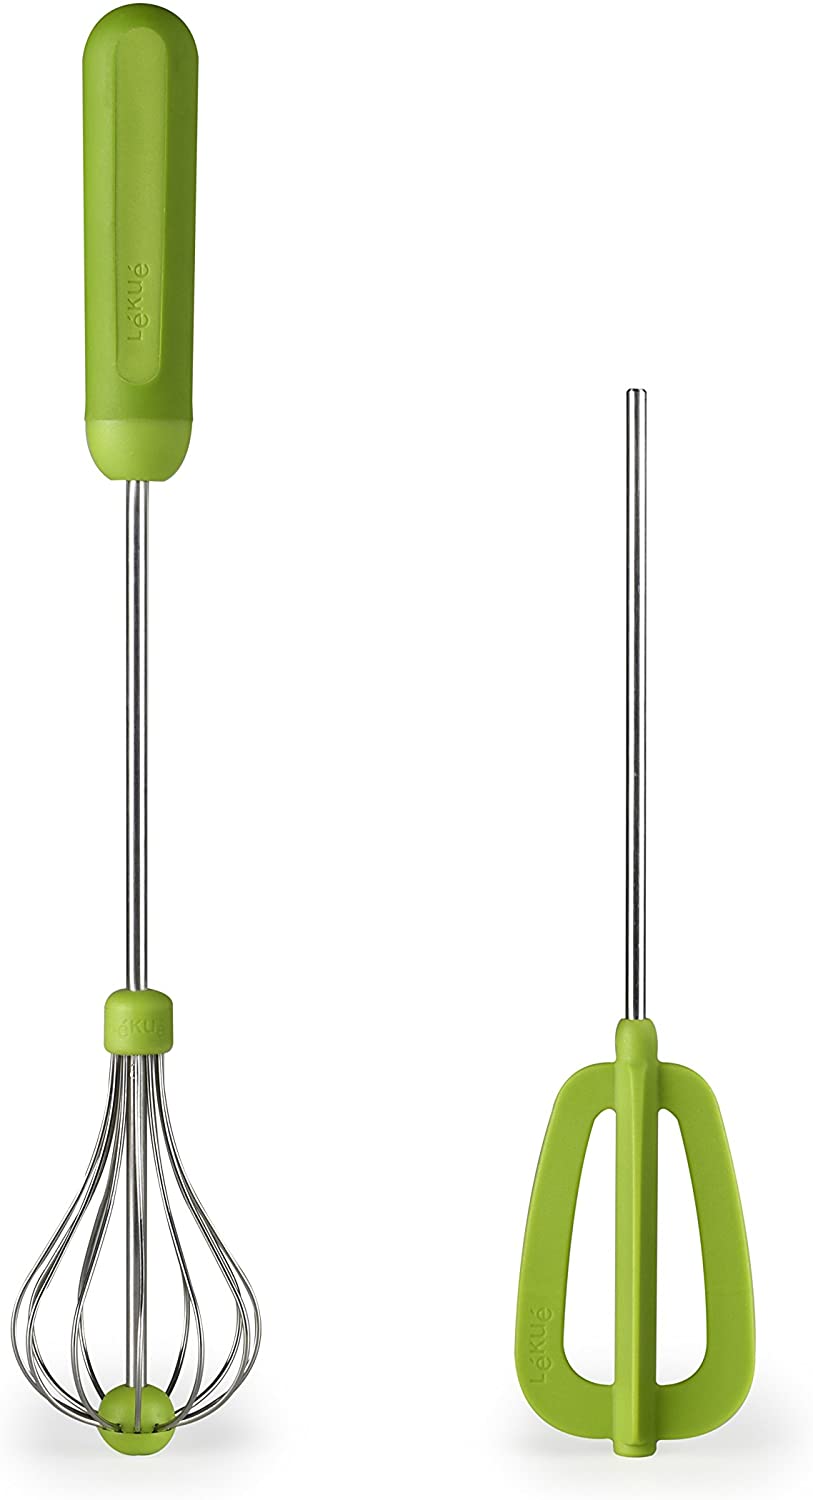 Lekue Lékué Whisk Set of 2 in Green, Silicone, 33 x 5.5 x 6 cm, 2 Units